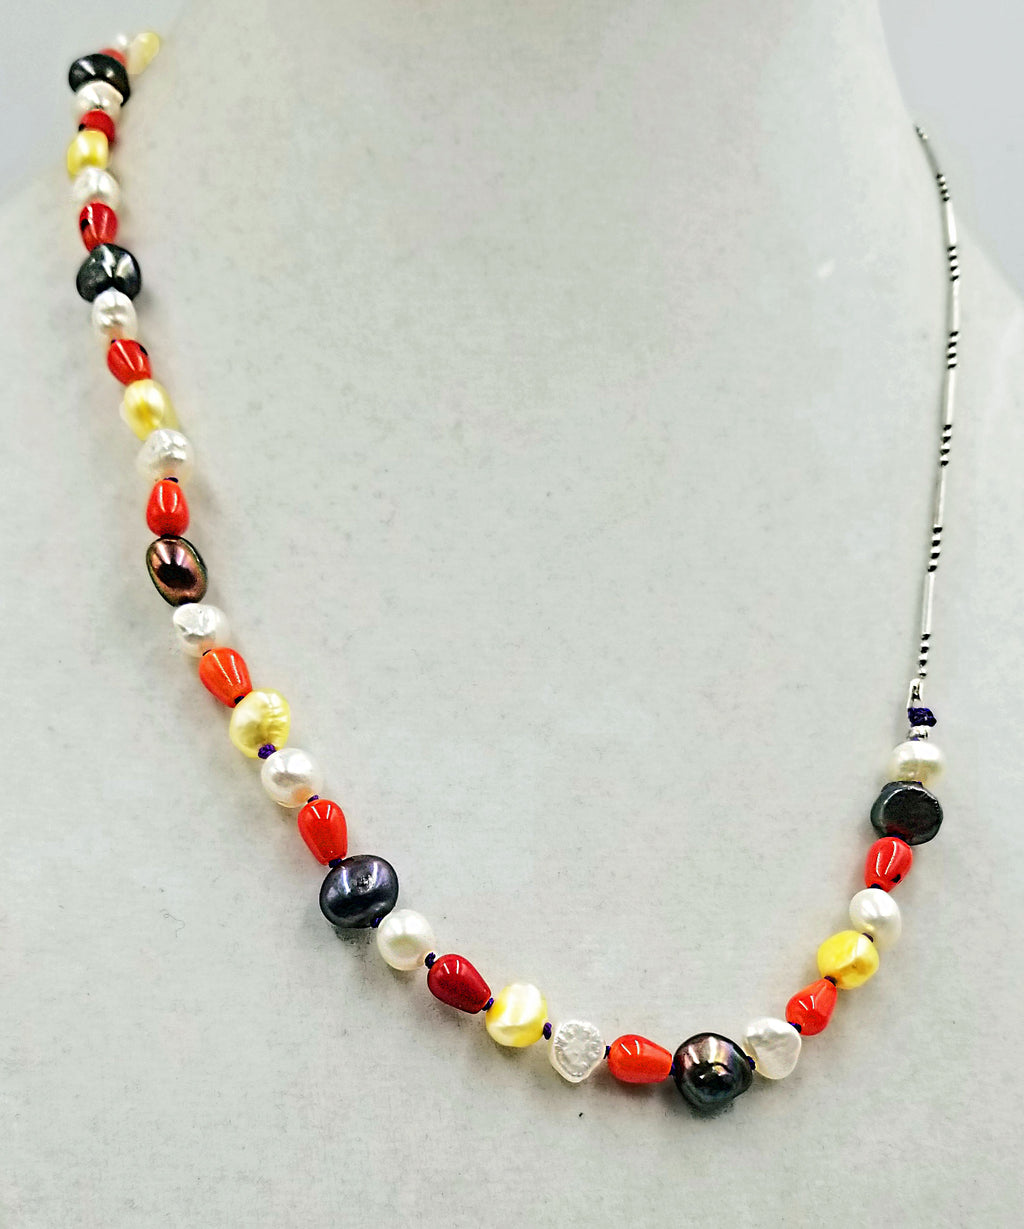 Past Work. Like Halloween Candy?  Coral, multi-colored freshwater cultured pearls, & sterling silver,  unisex necklace with hand-knotted purple silk. 21" Length. Sold.